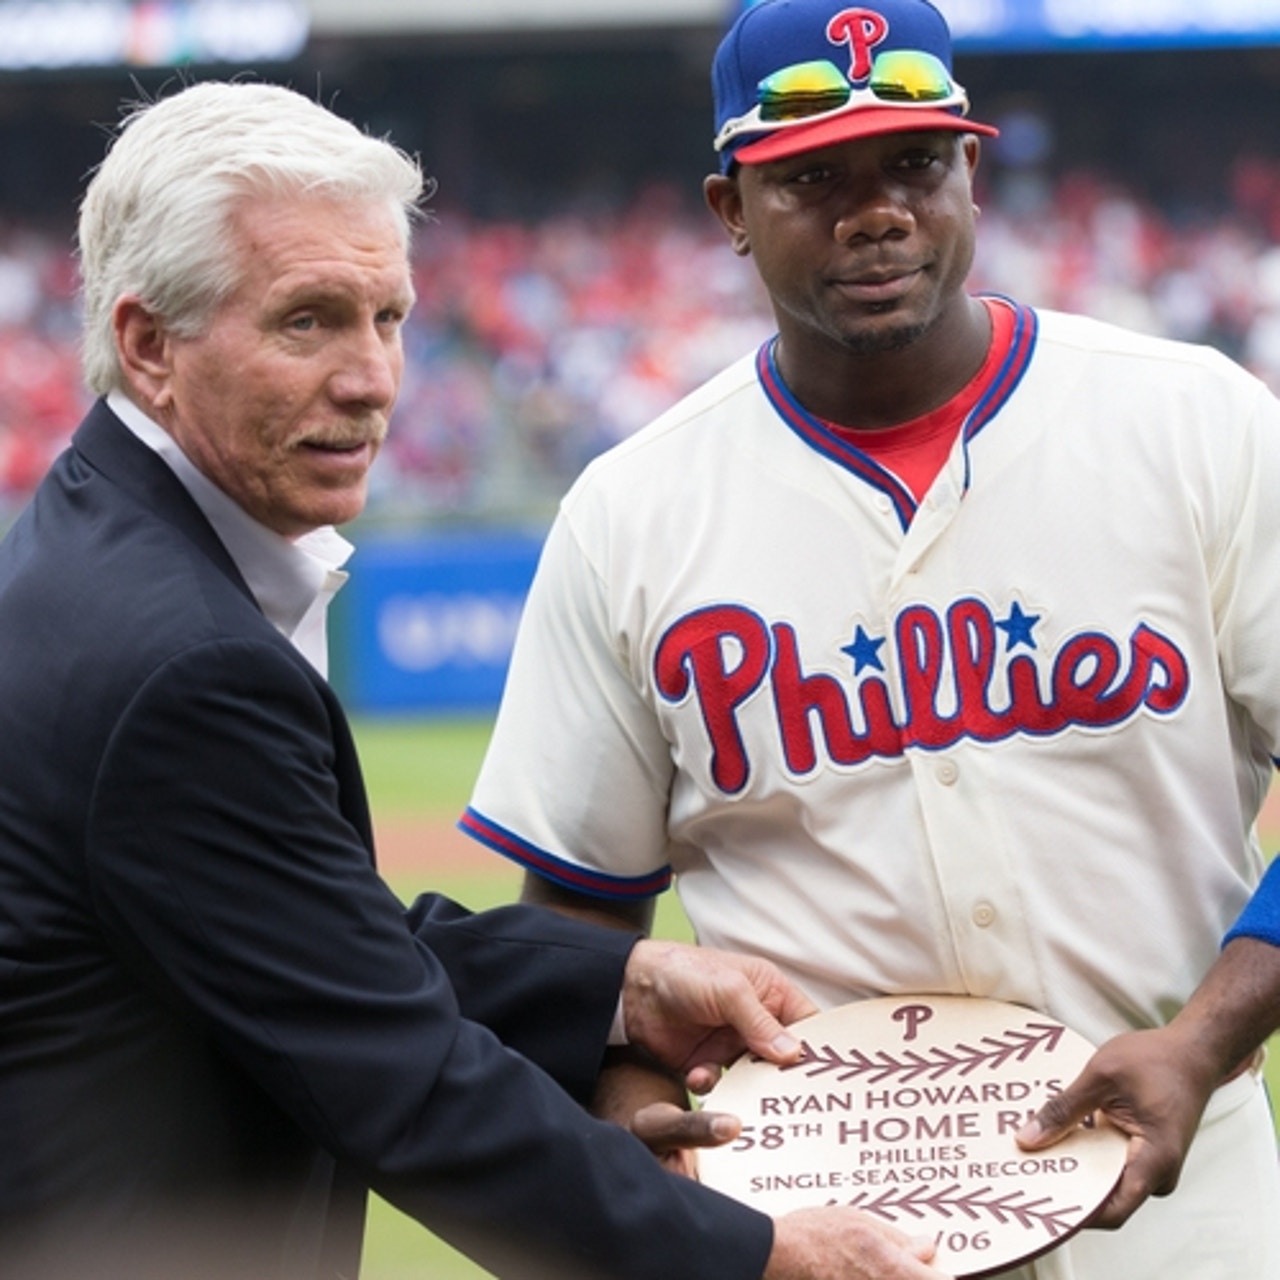 In 1981, baseball stopped and a great Phillies team never